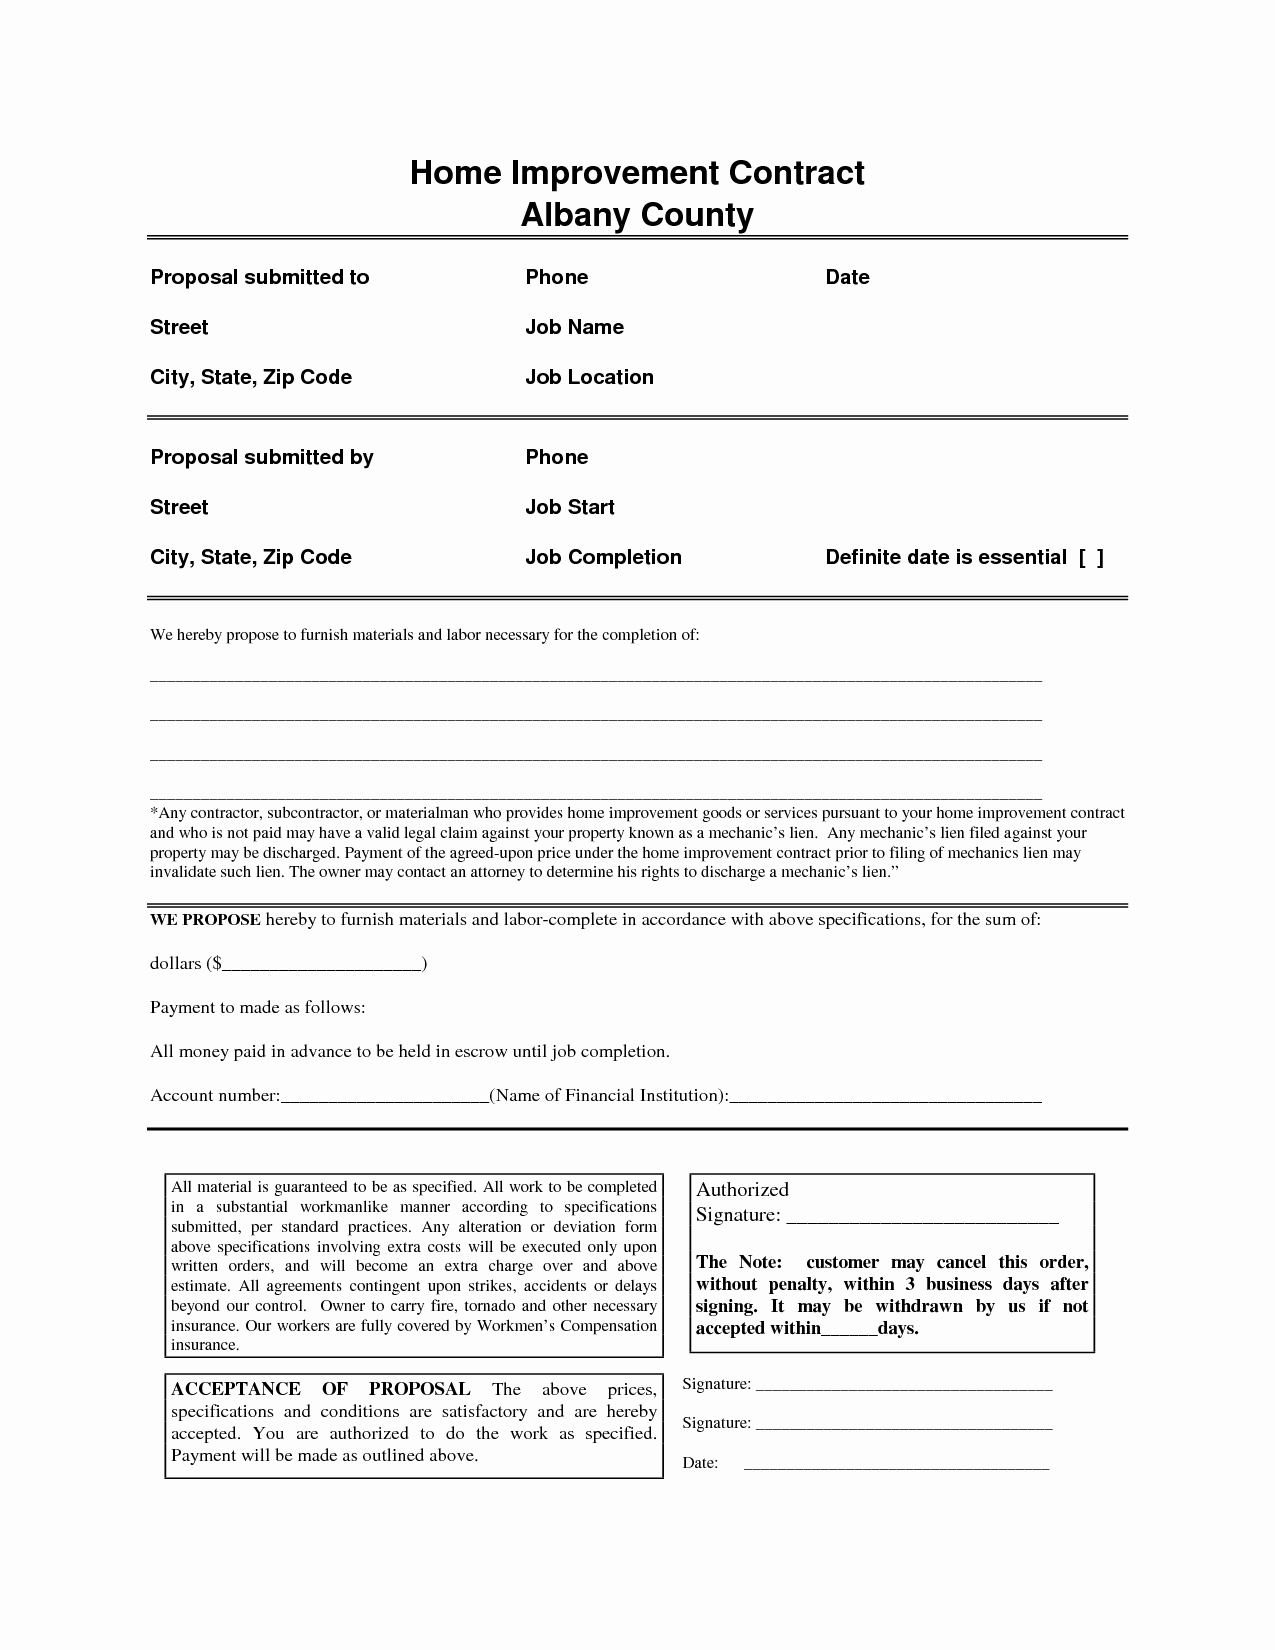 Home Improvement Contract Template Awesome Home Improvement Contract Free Printable Documents